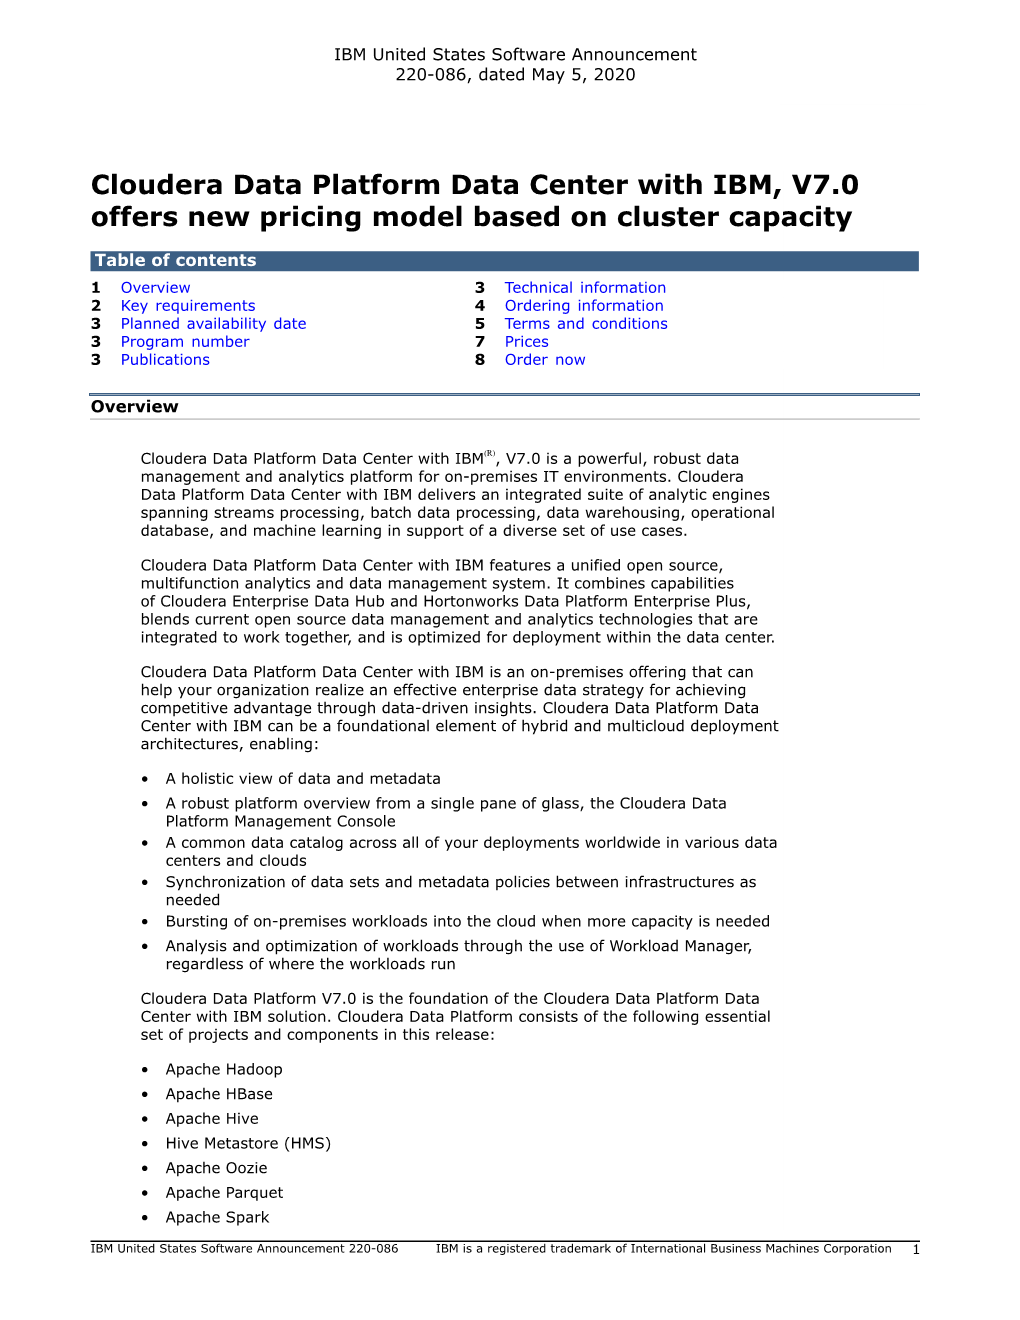 Cloudera Data Platform Data Center with IBM, V7.0 Offers New Pricing Model Based on Cluster Capacity